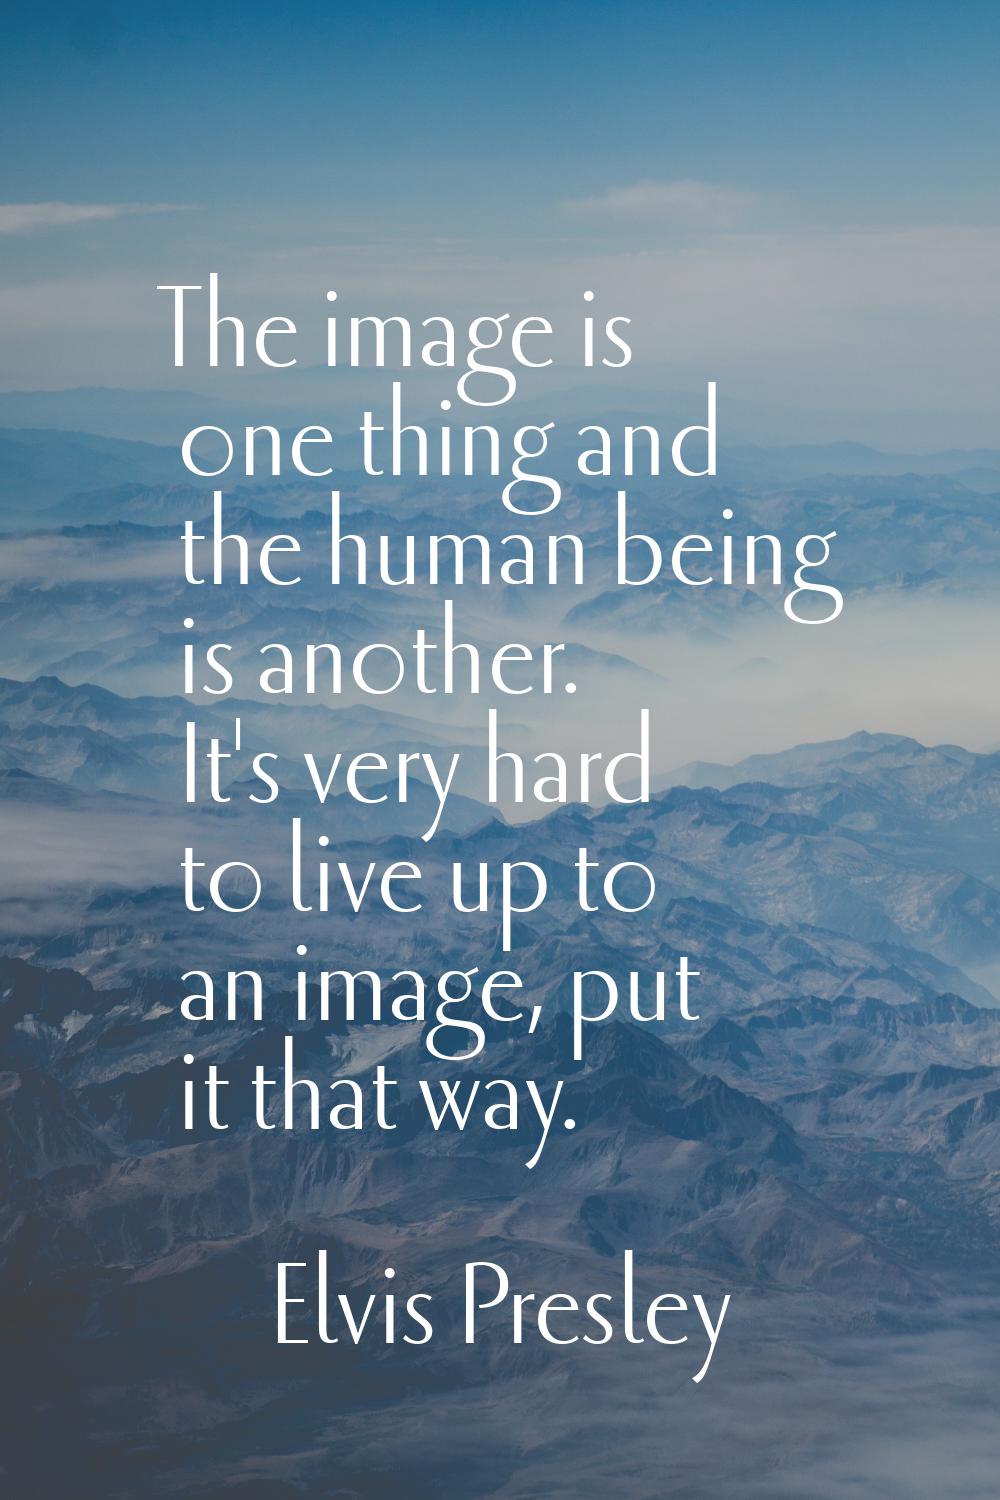 The image is one thing and the human being is another. It's very hard to live up to an image, put i